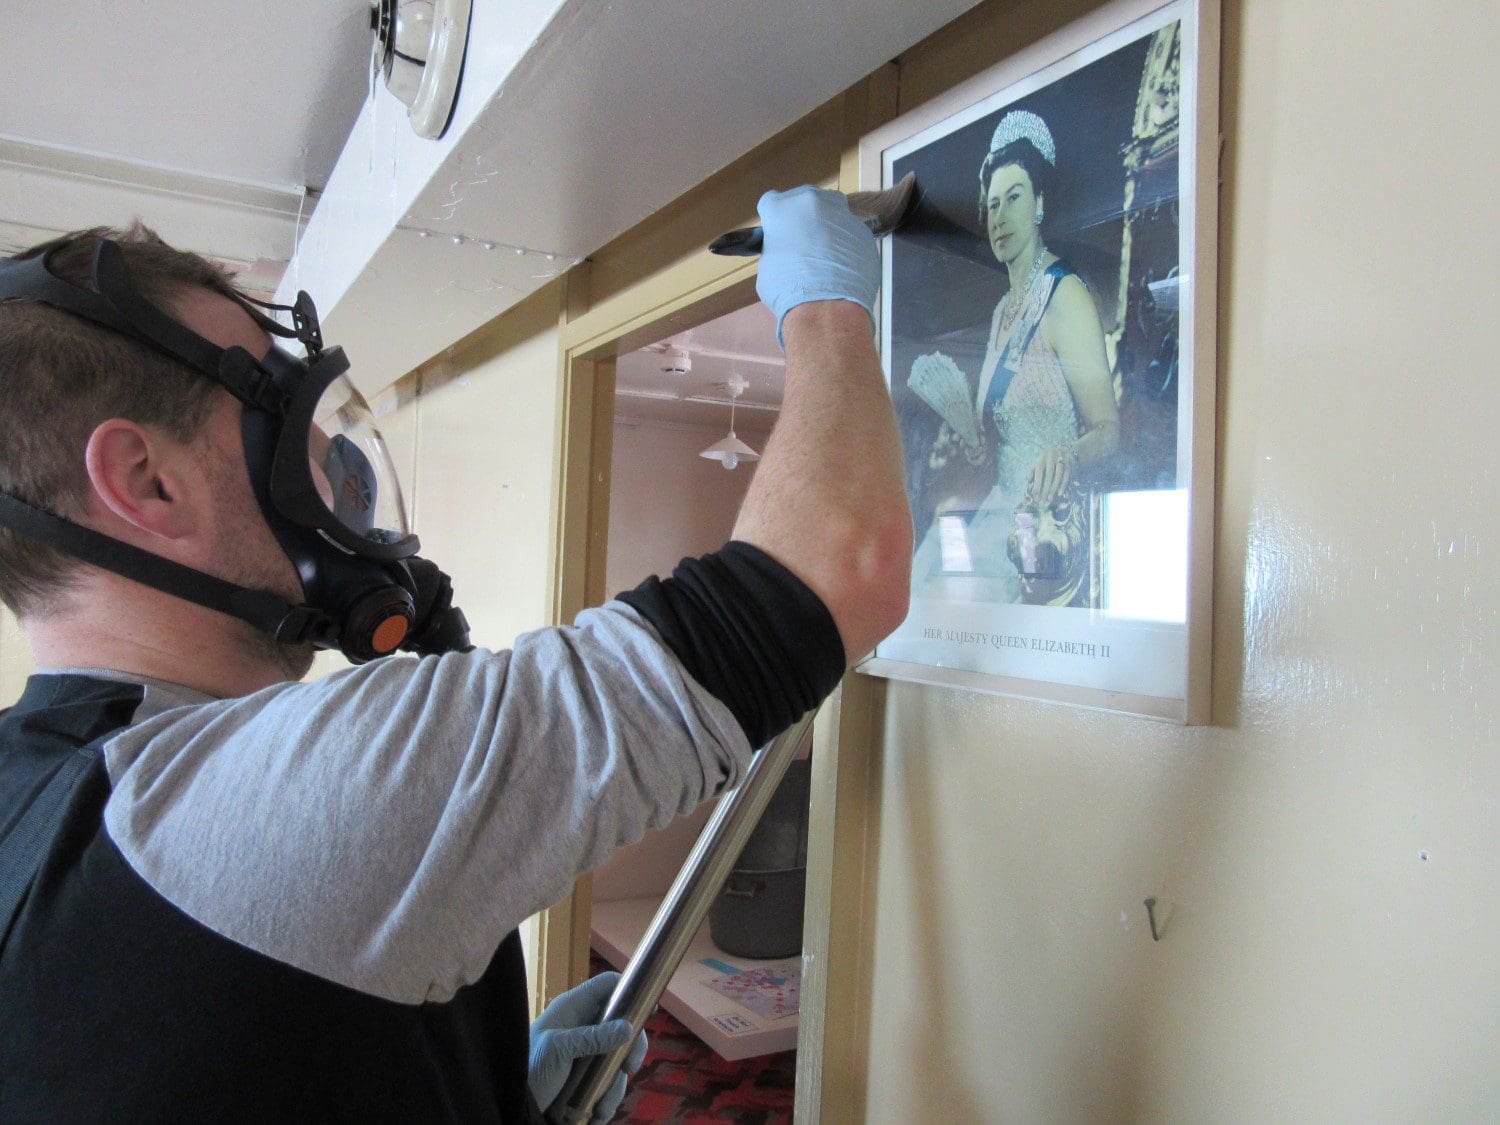 Ciaran cleans a portrait of HM the Queen inside the TAE hut